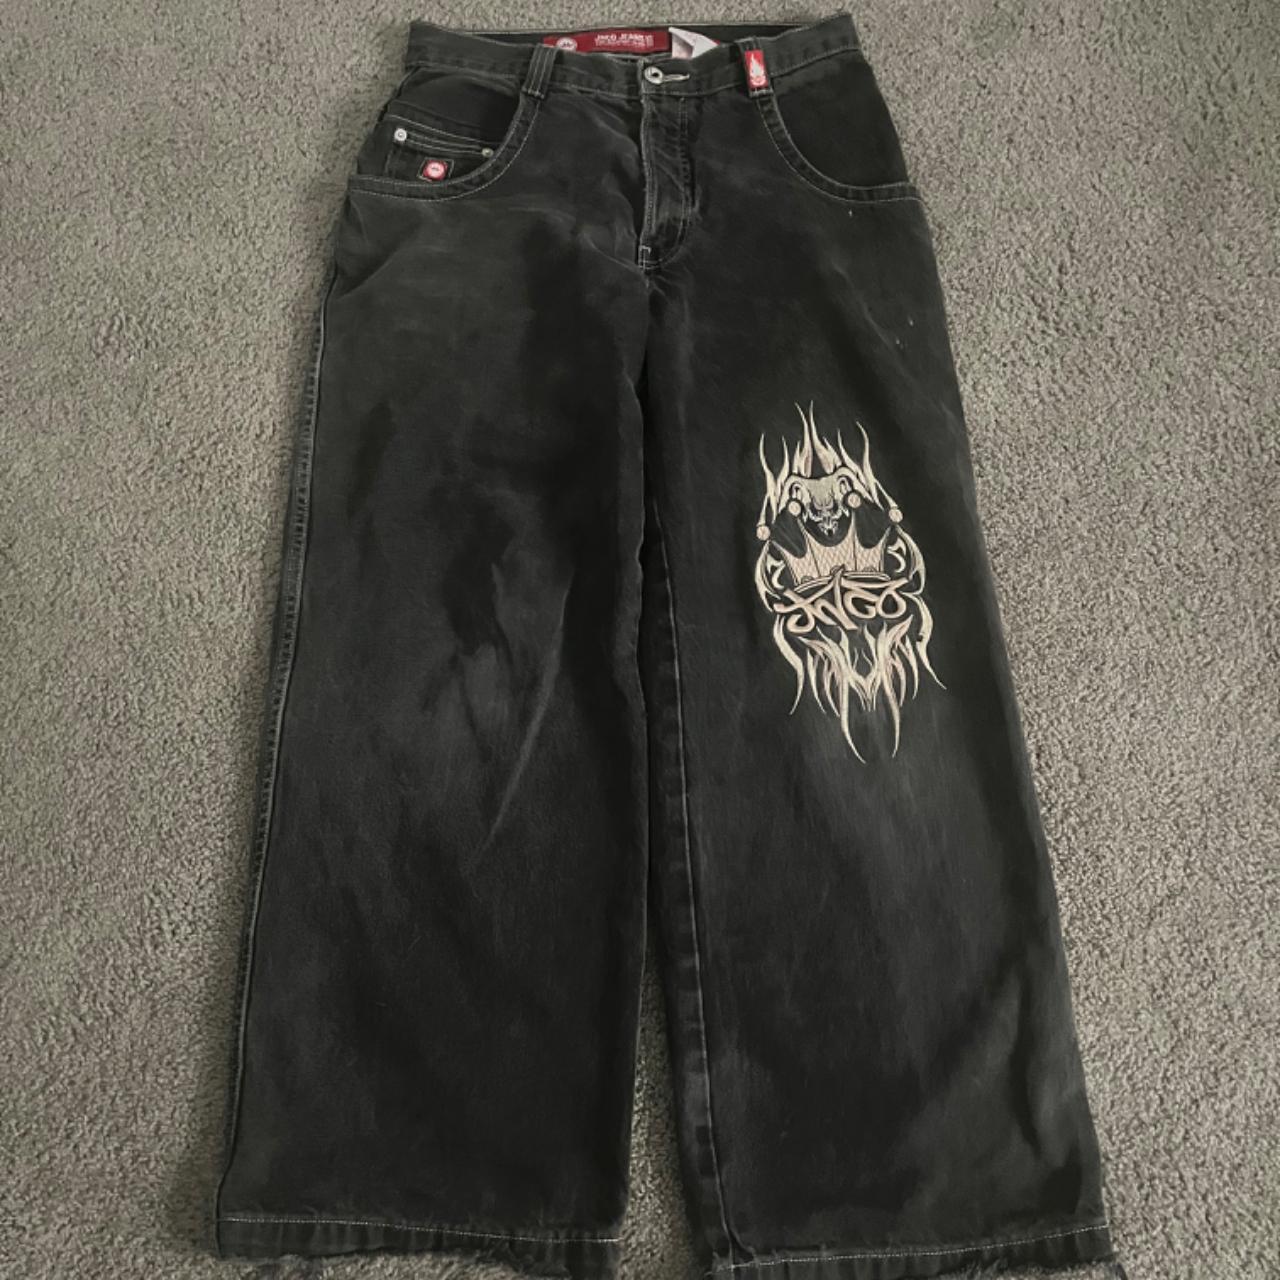 INCREDIBLY RARE AND BAGGY SNAKEBITE JNCOS! send me... - Depop